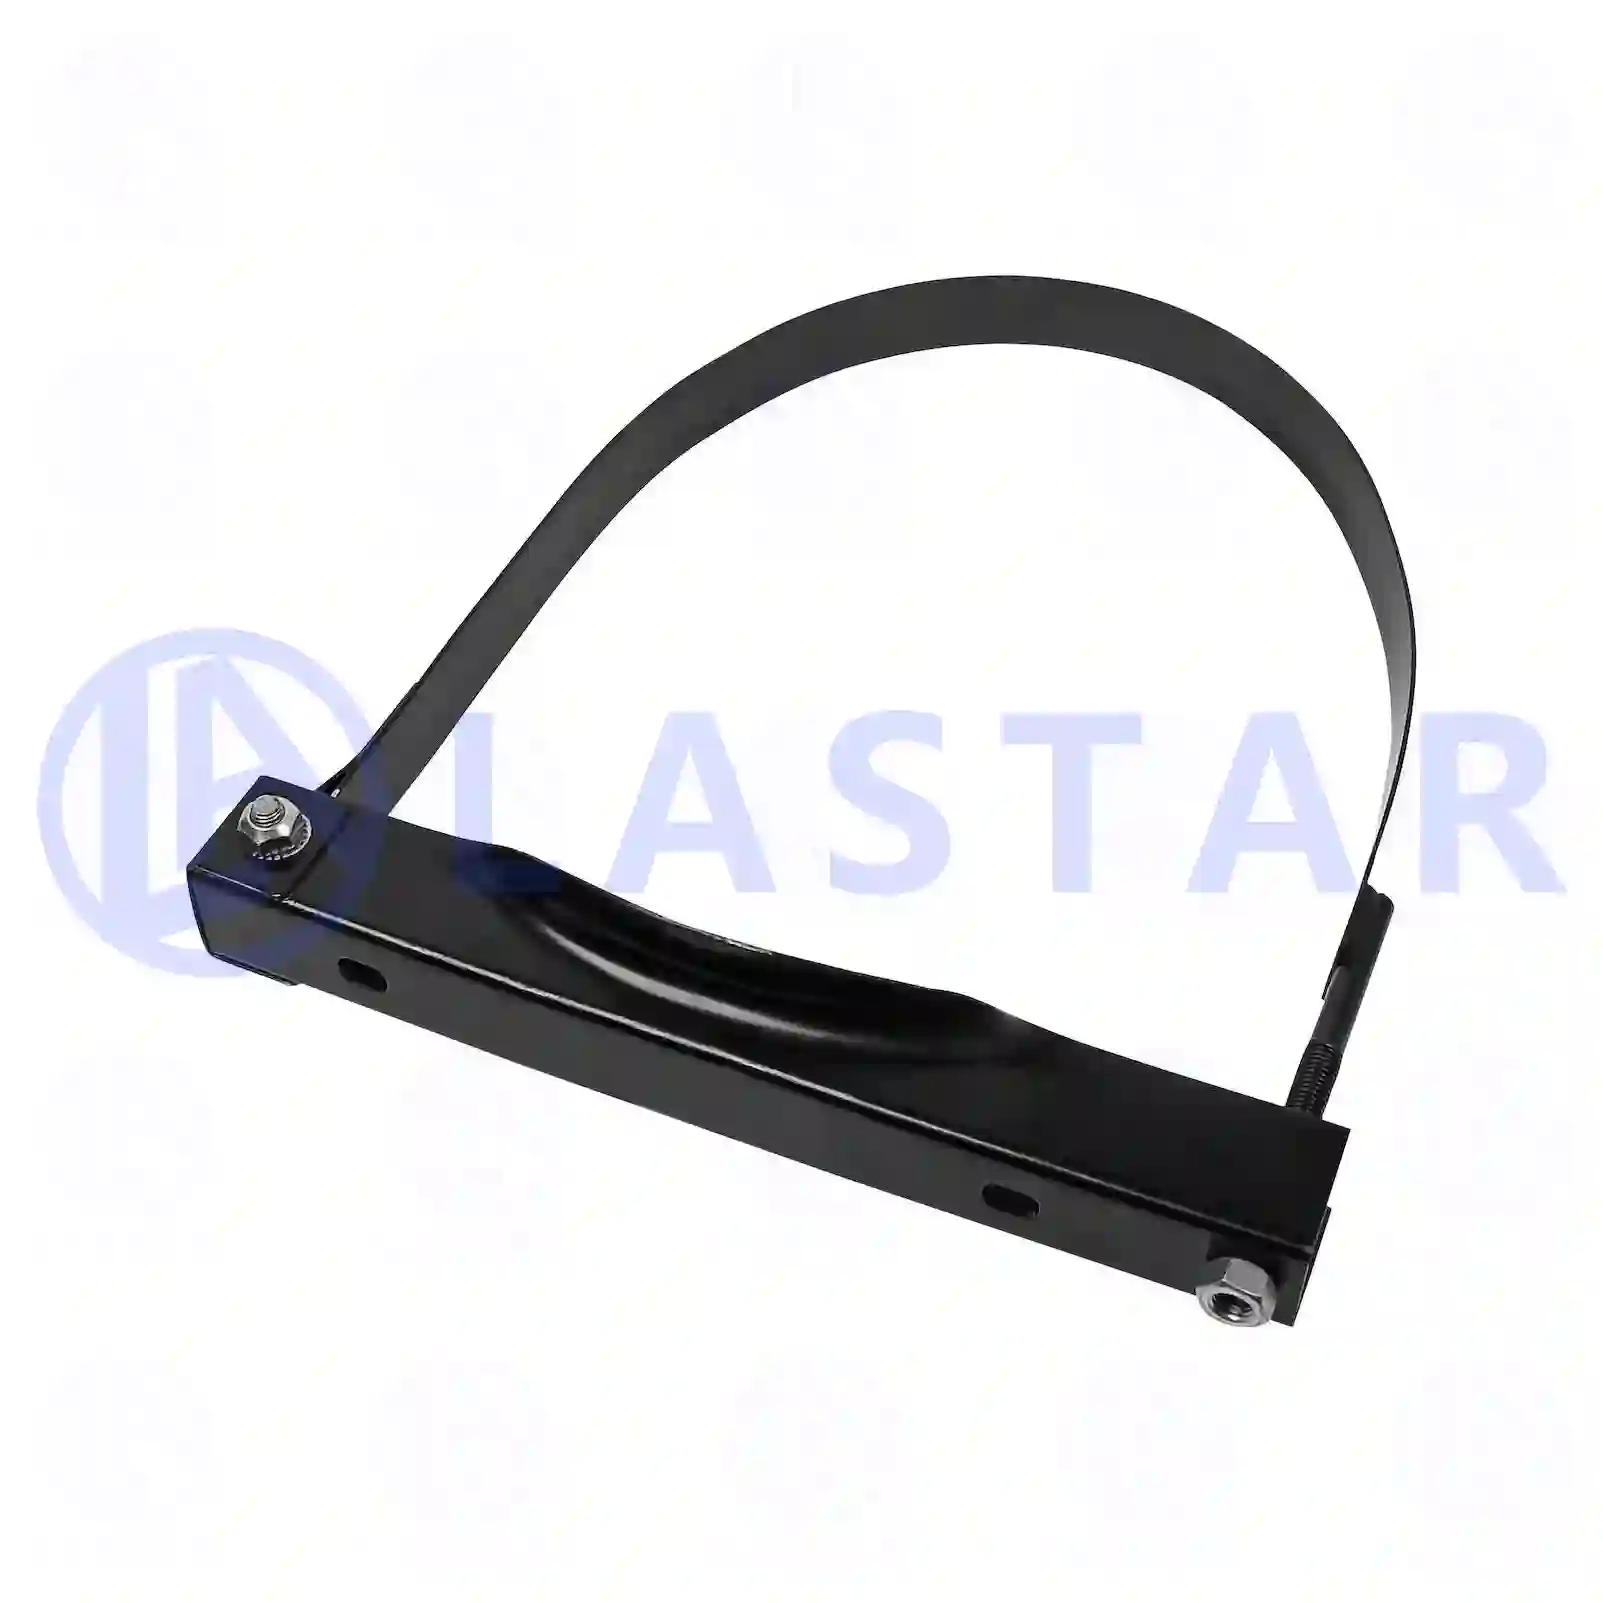 Tensioning band, 77715863, 1505421, 1934816 ||  77715863 Lastar Spare Part | Truck Spare Parts, Auotomotive Spare Parts Tensioning band, 77715863, 1505421, 1934816 ||  77715863 Lastar Spare Part | Truck Spare Parts, Auotomotive Spare Parts